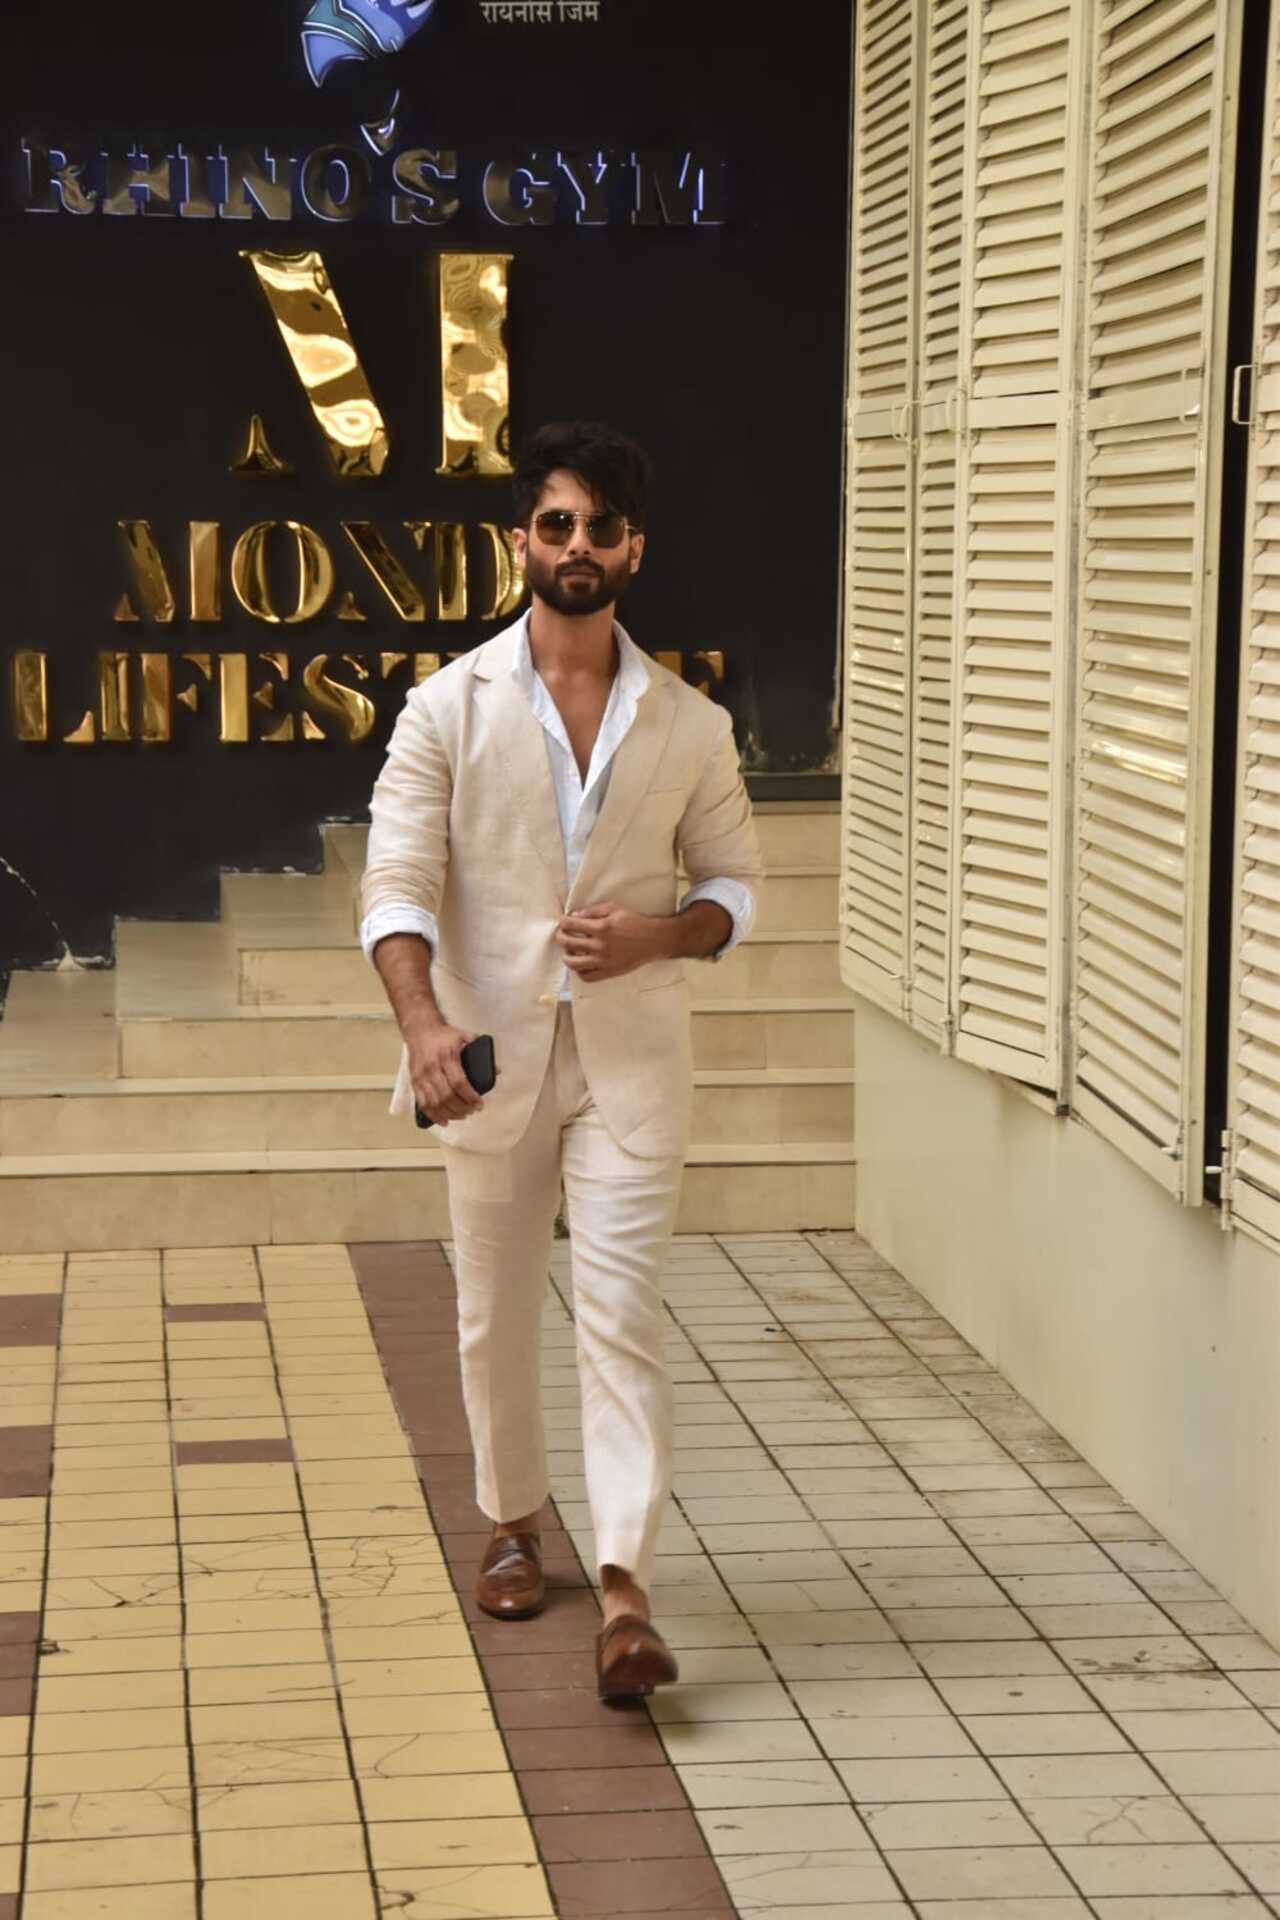 Shahid Kapoor attended a meeting in the city